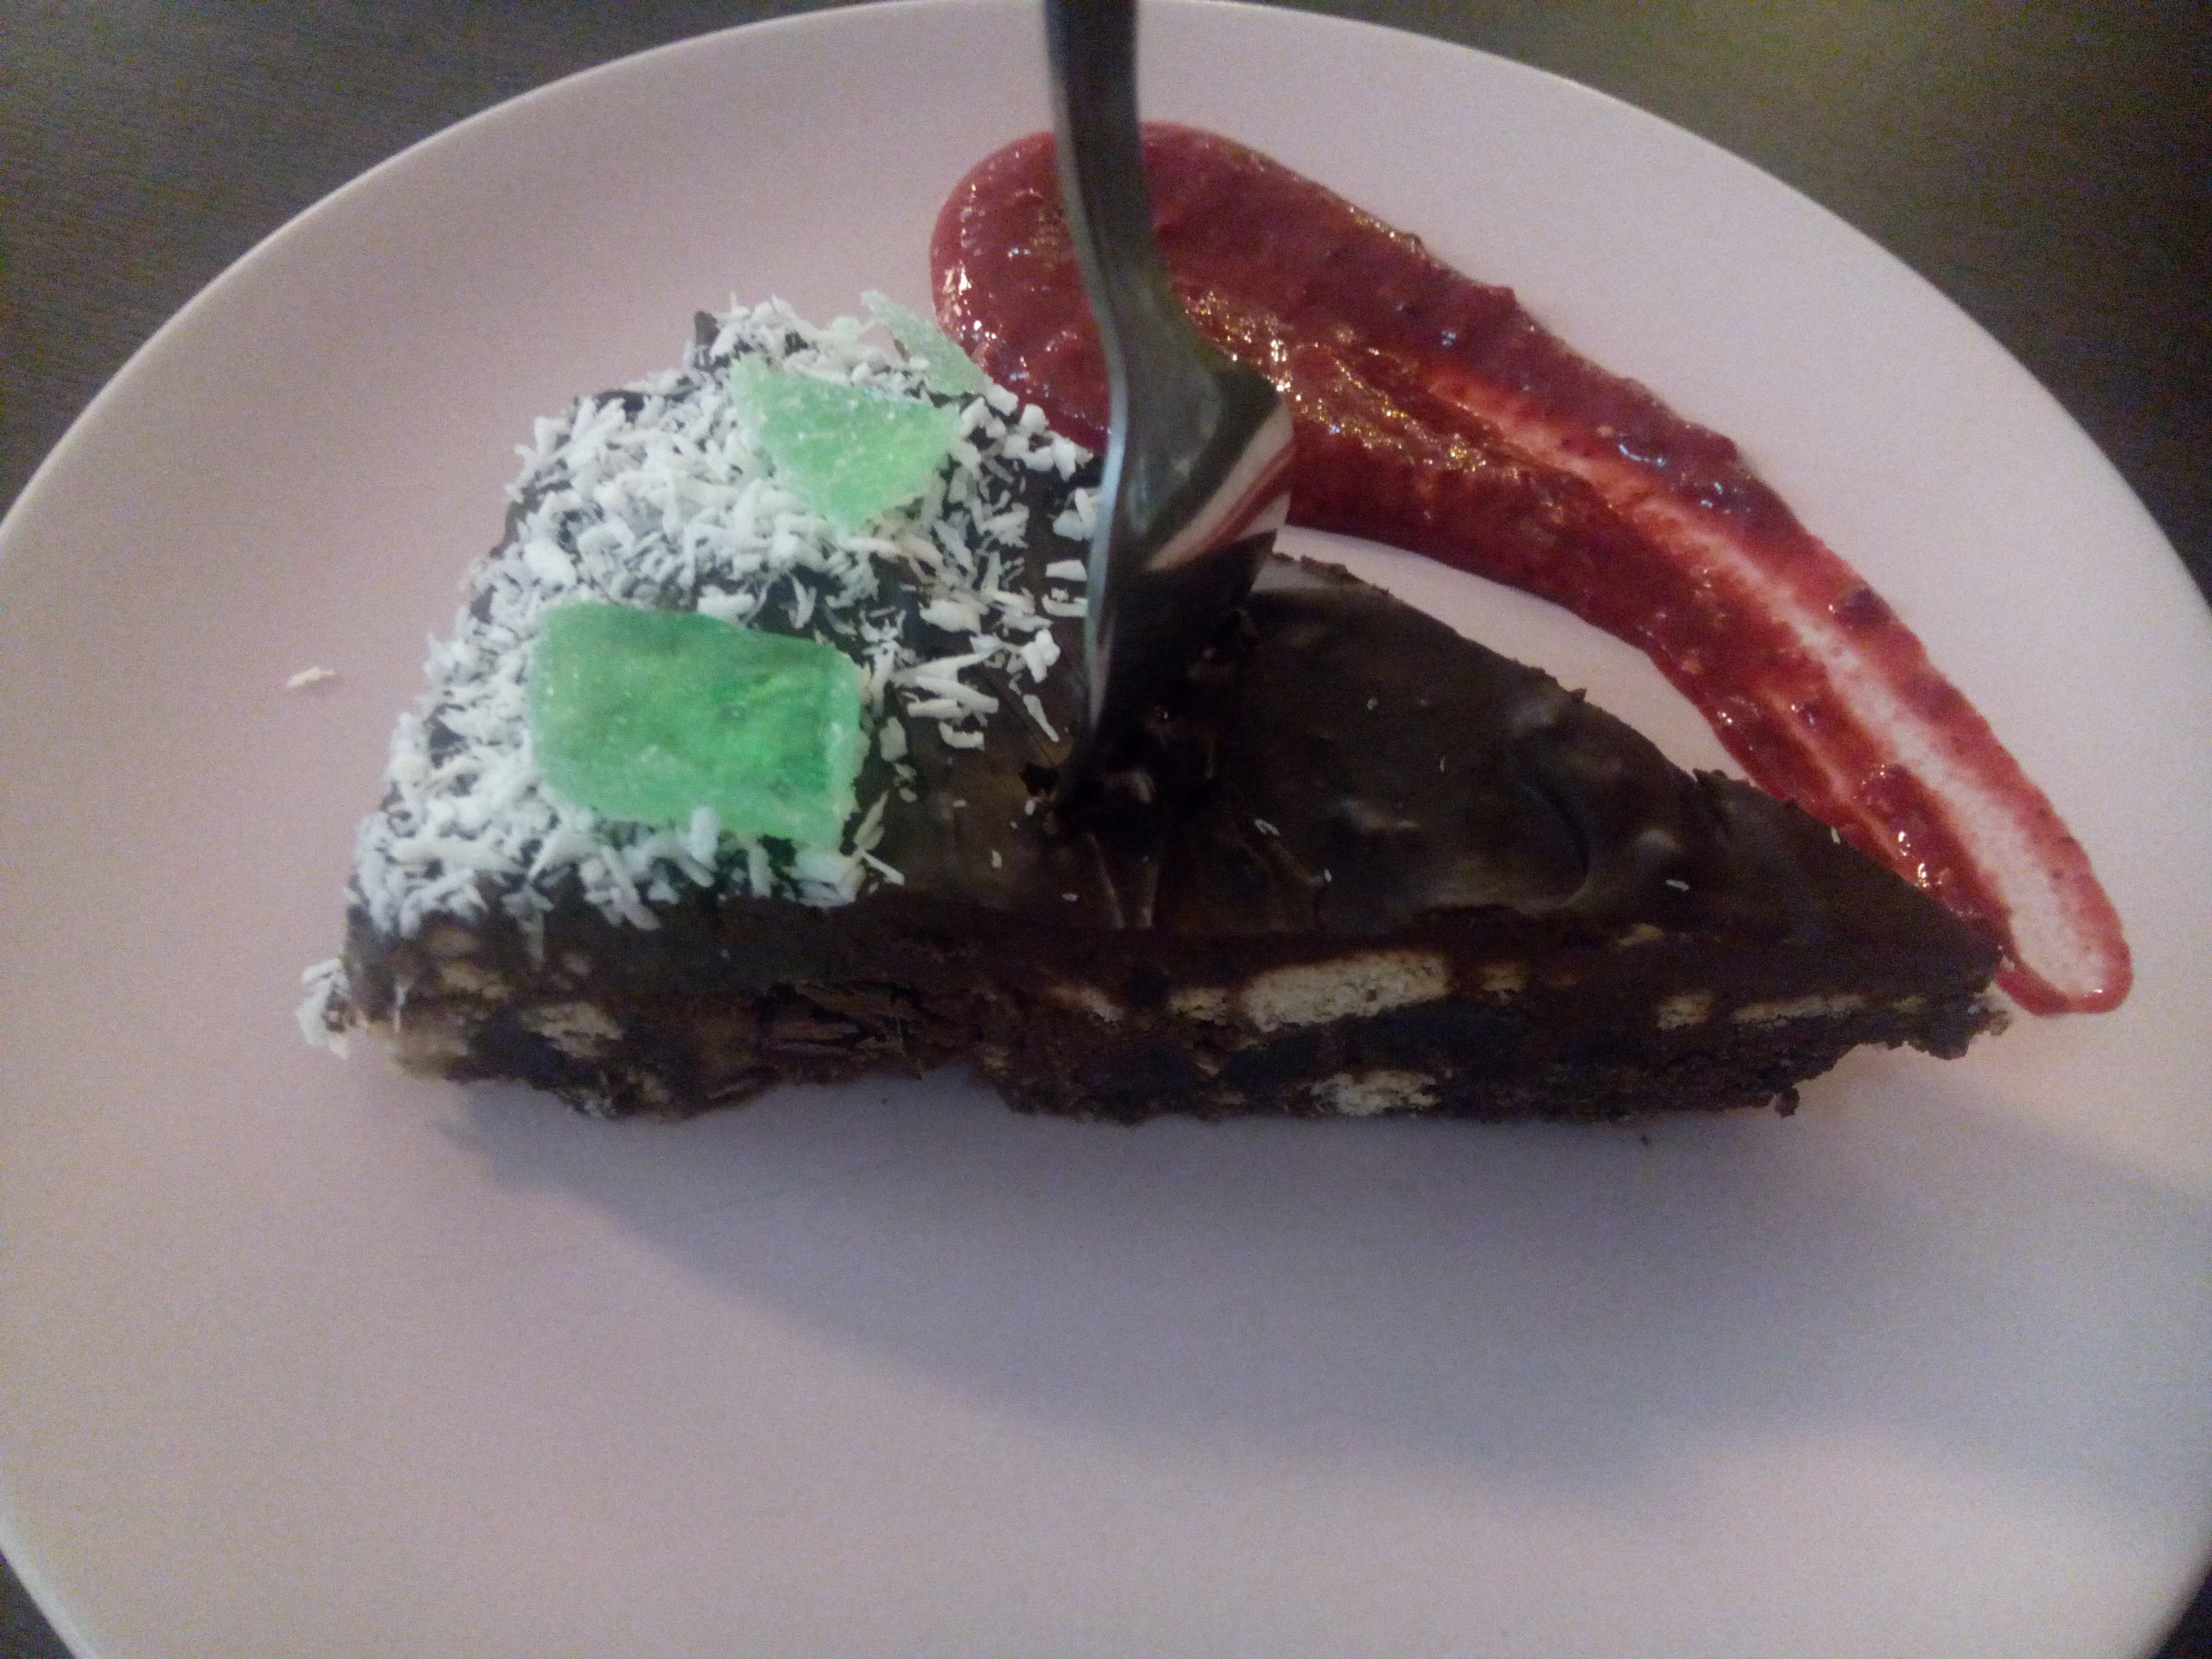 A white cake with a smear of red jam around a triangle of cake, with coconut sprinkles and green candy on top, and a fork stuck upwards